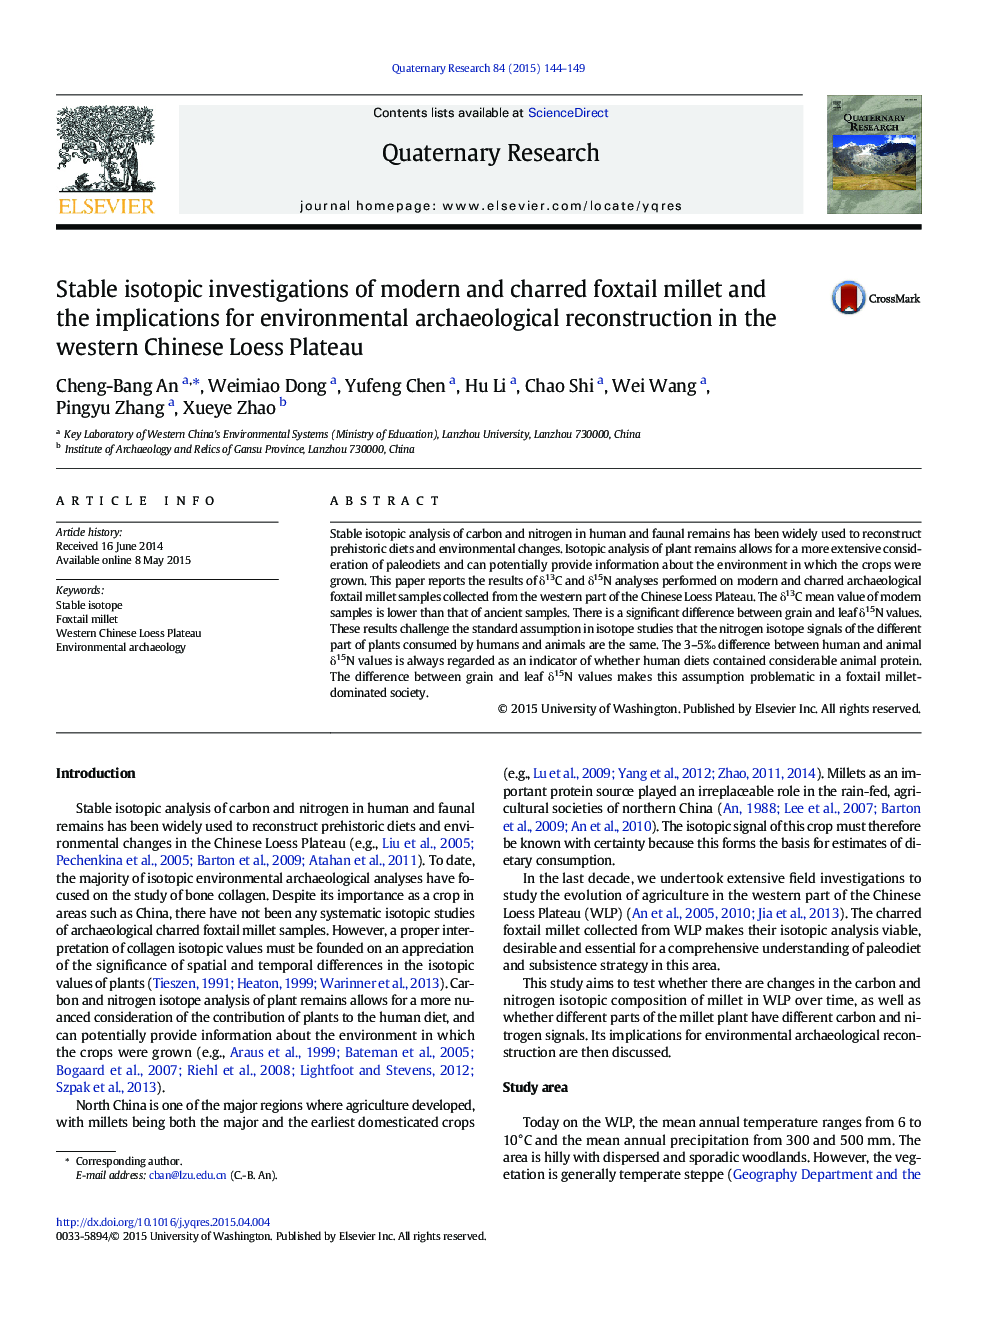 Stable isotopic investigations of modern and charred foxtail millet and the implications for environmental archaeological reconstruction in the western Chinese Loess Plateau